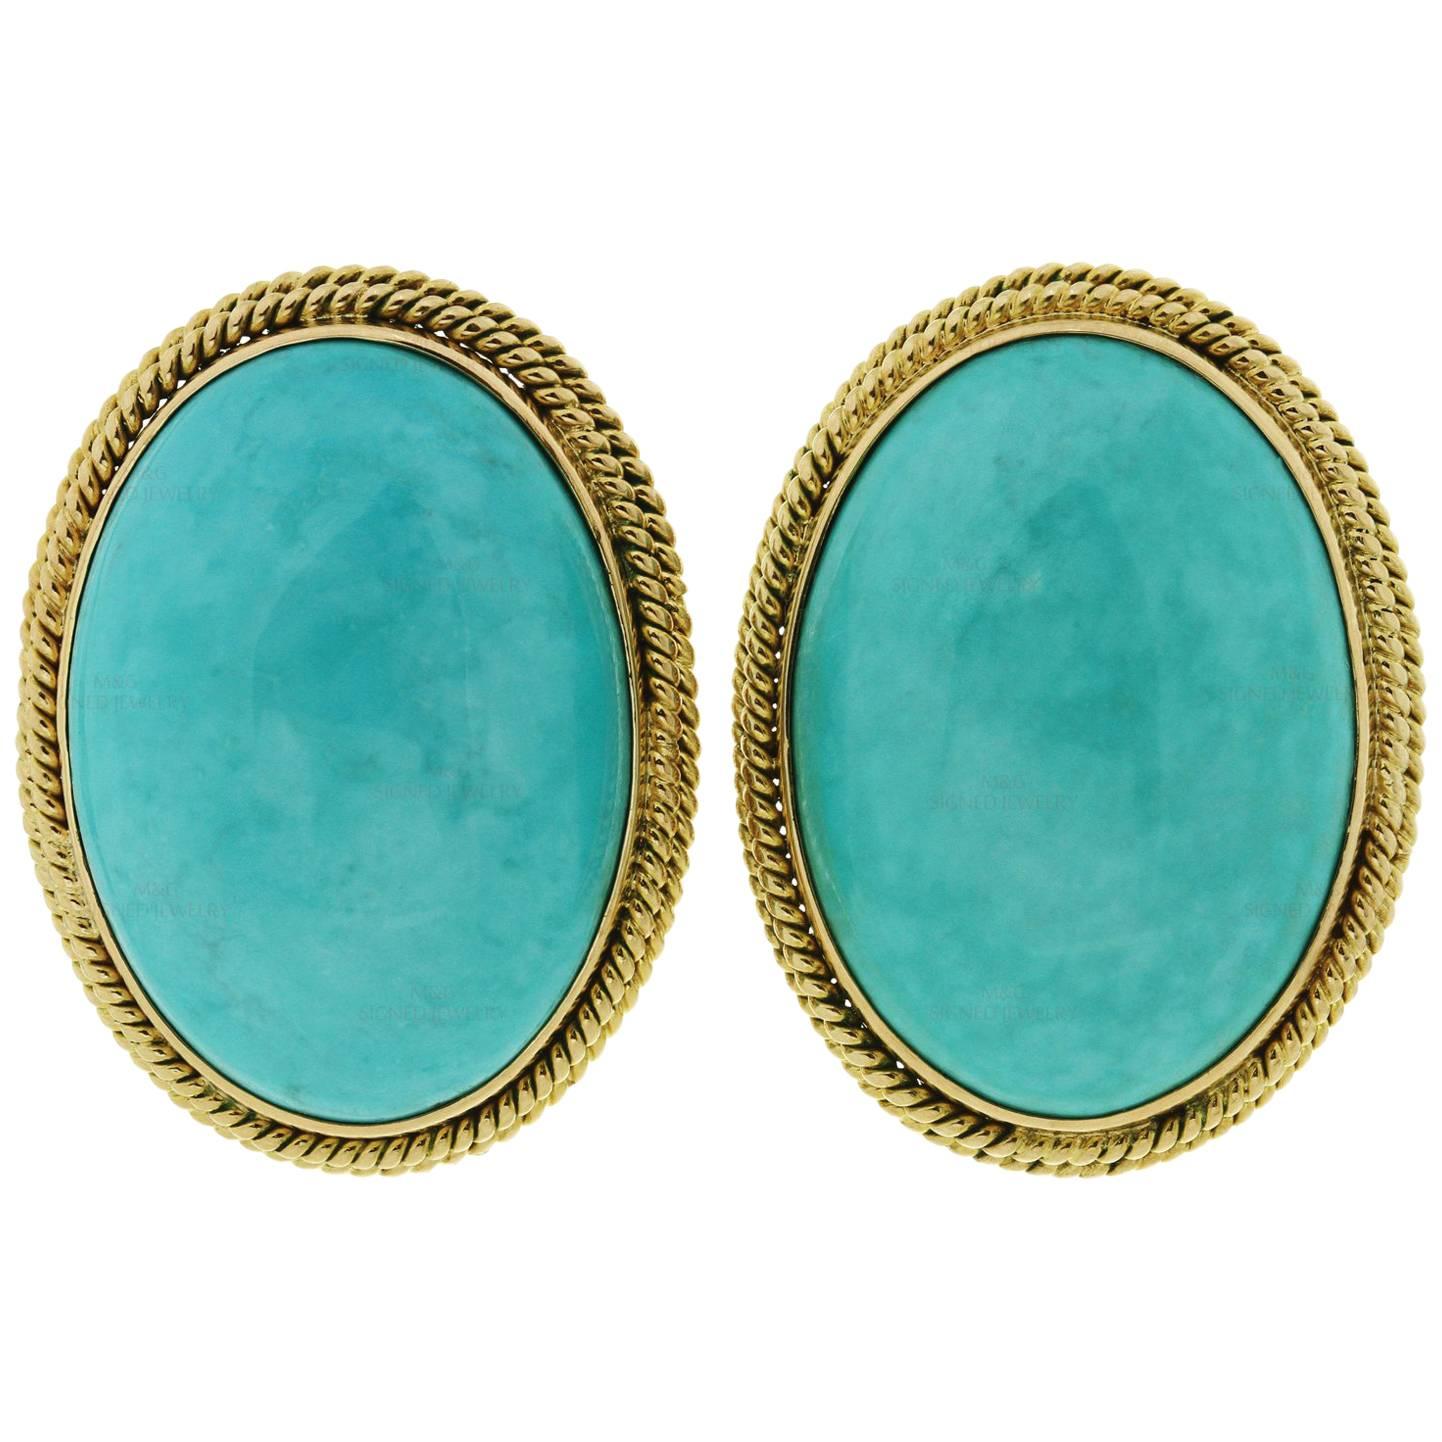 Retro Oval Cabochon Turquoise Gold Clip-On Earrings, 1960s